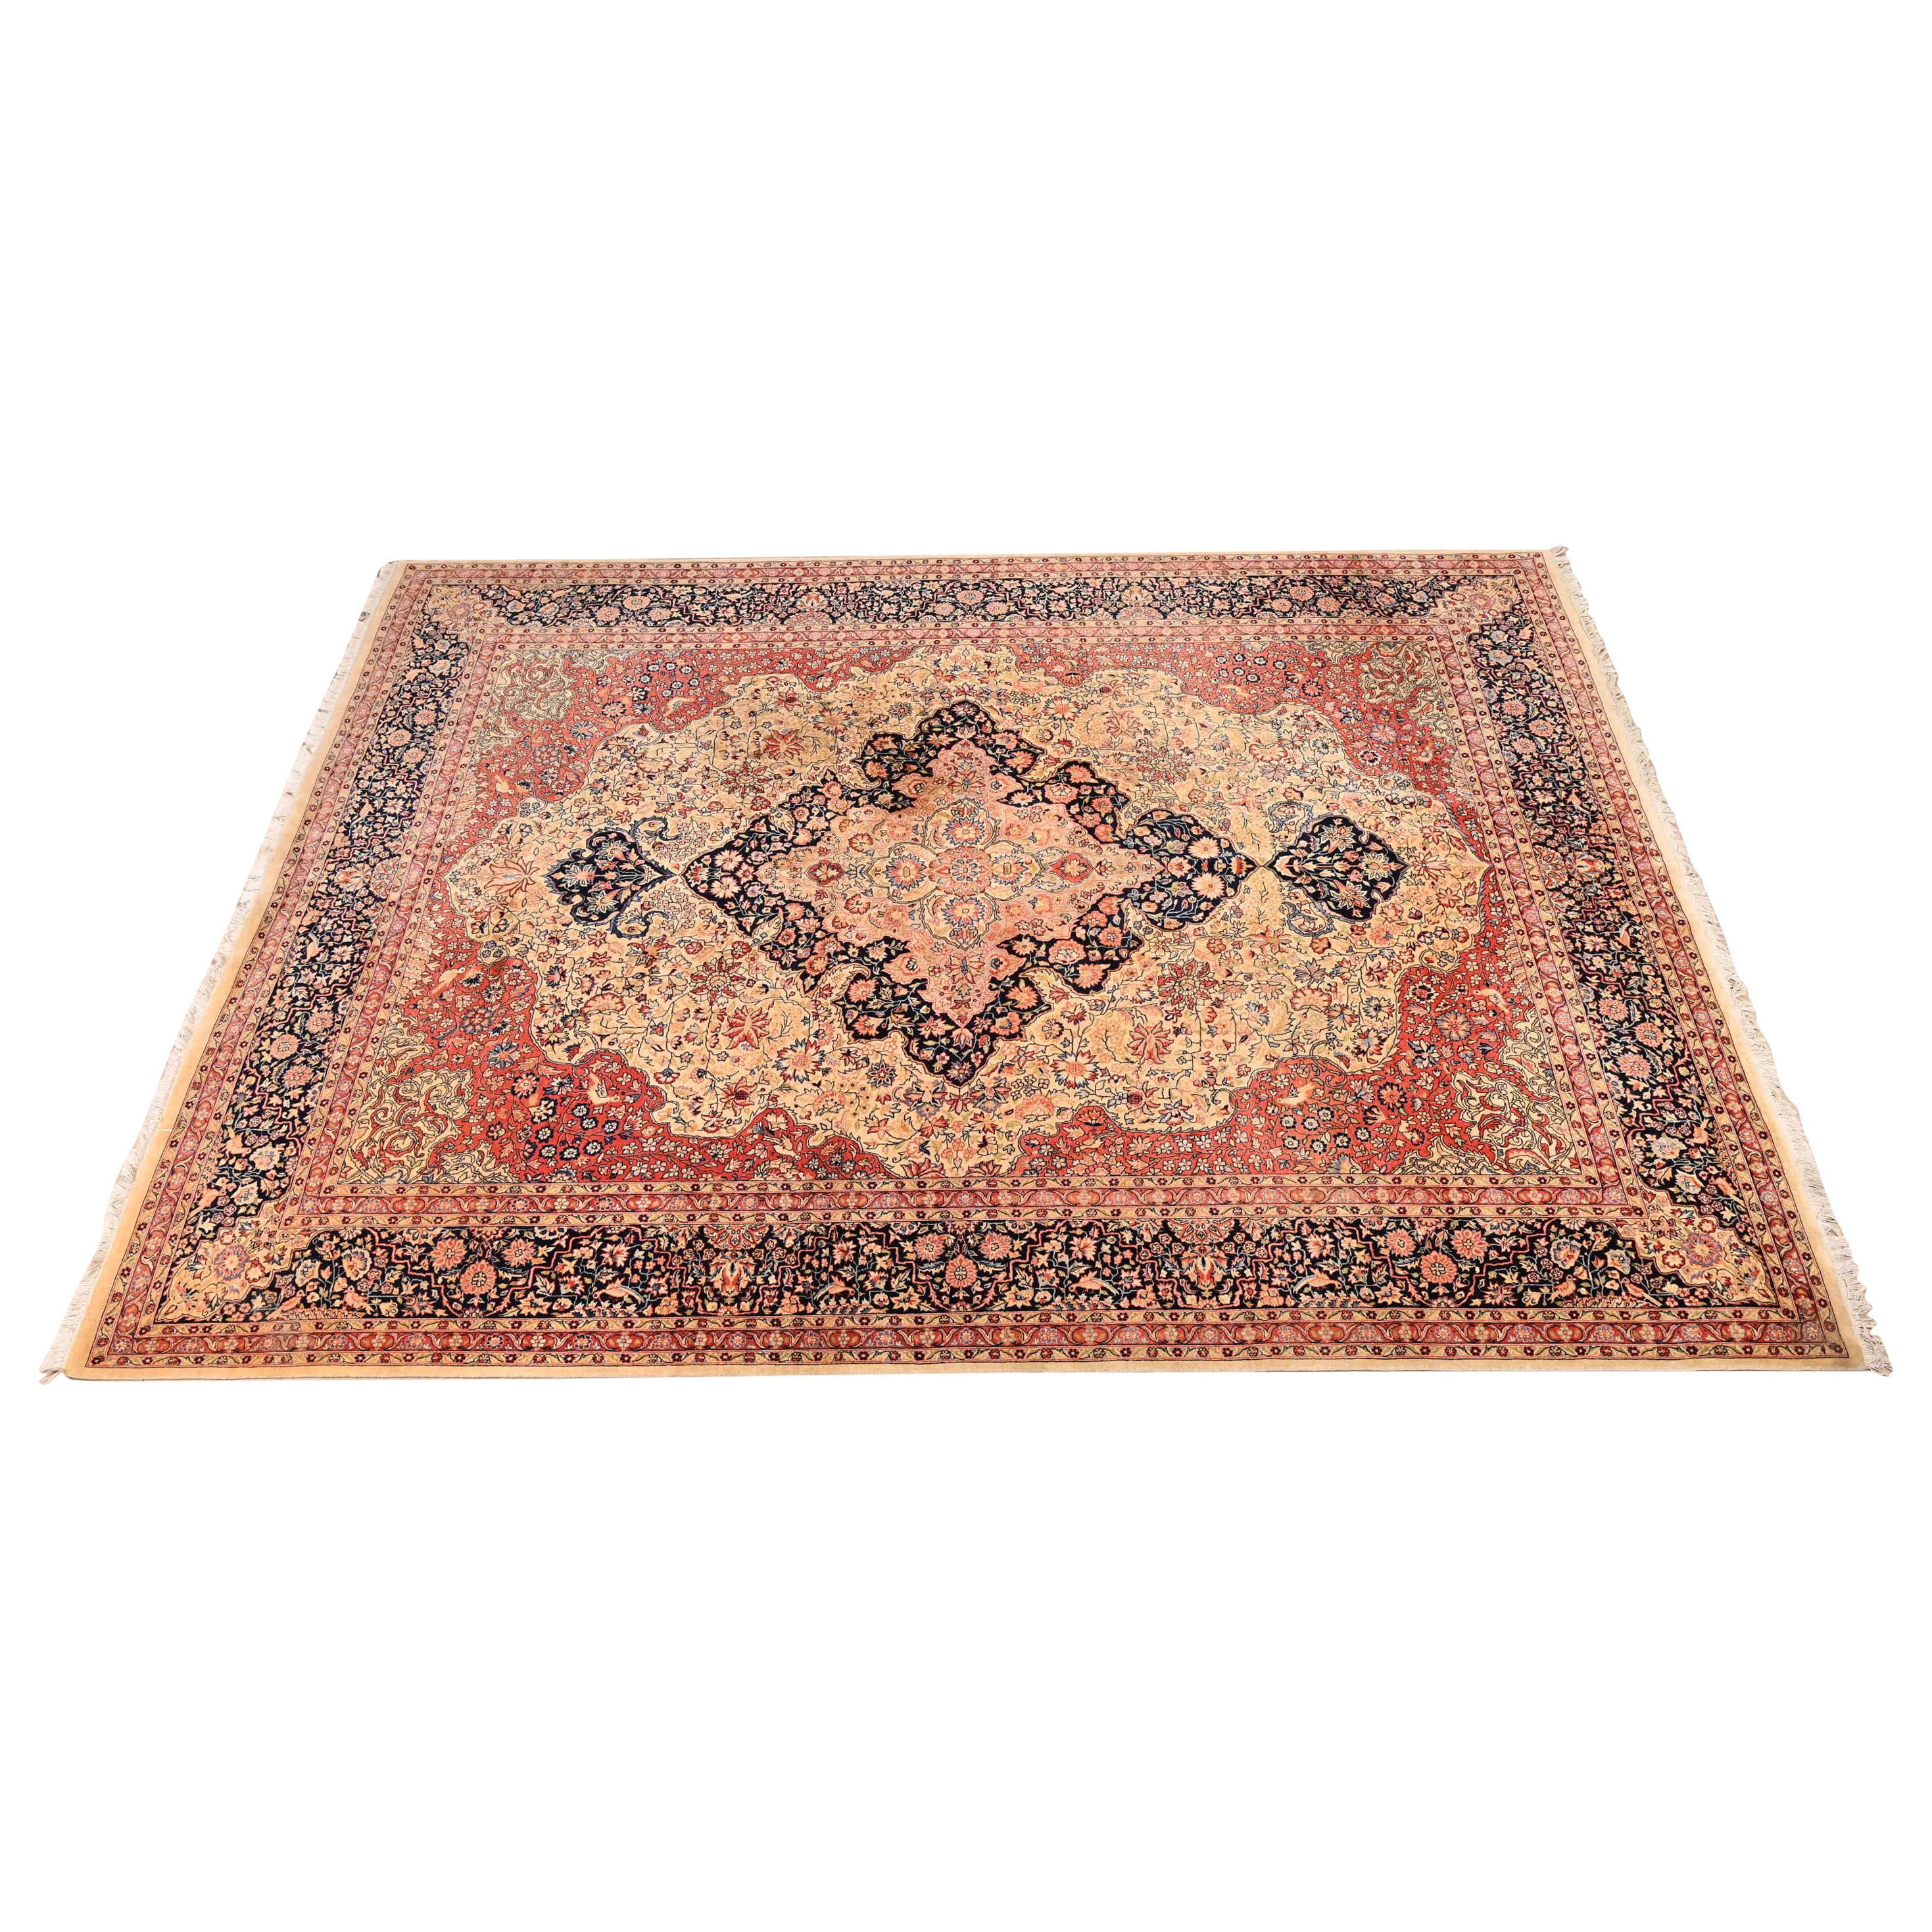 Vintage Hand-Knotted Persian Tabriz Room Size Wool Area Rug For Sale